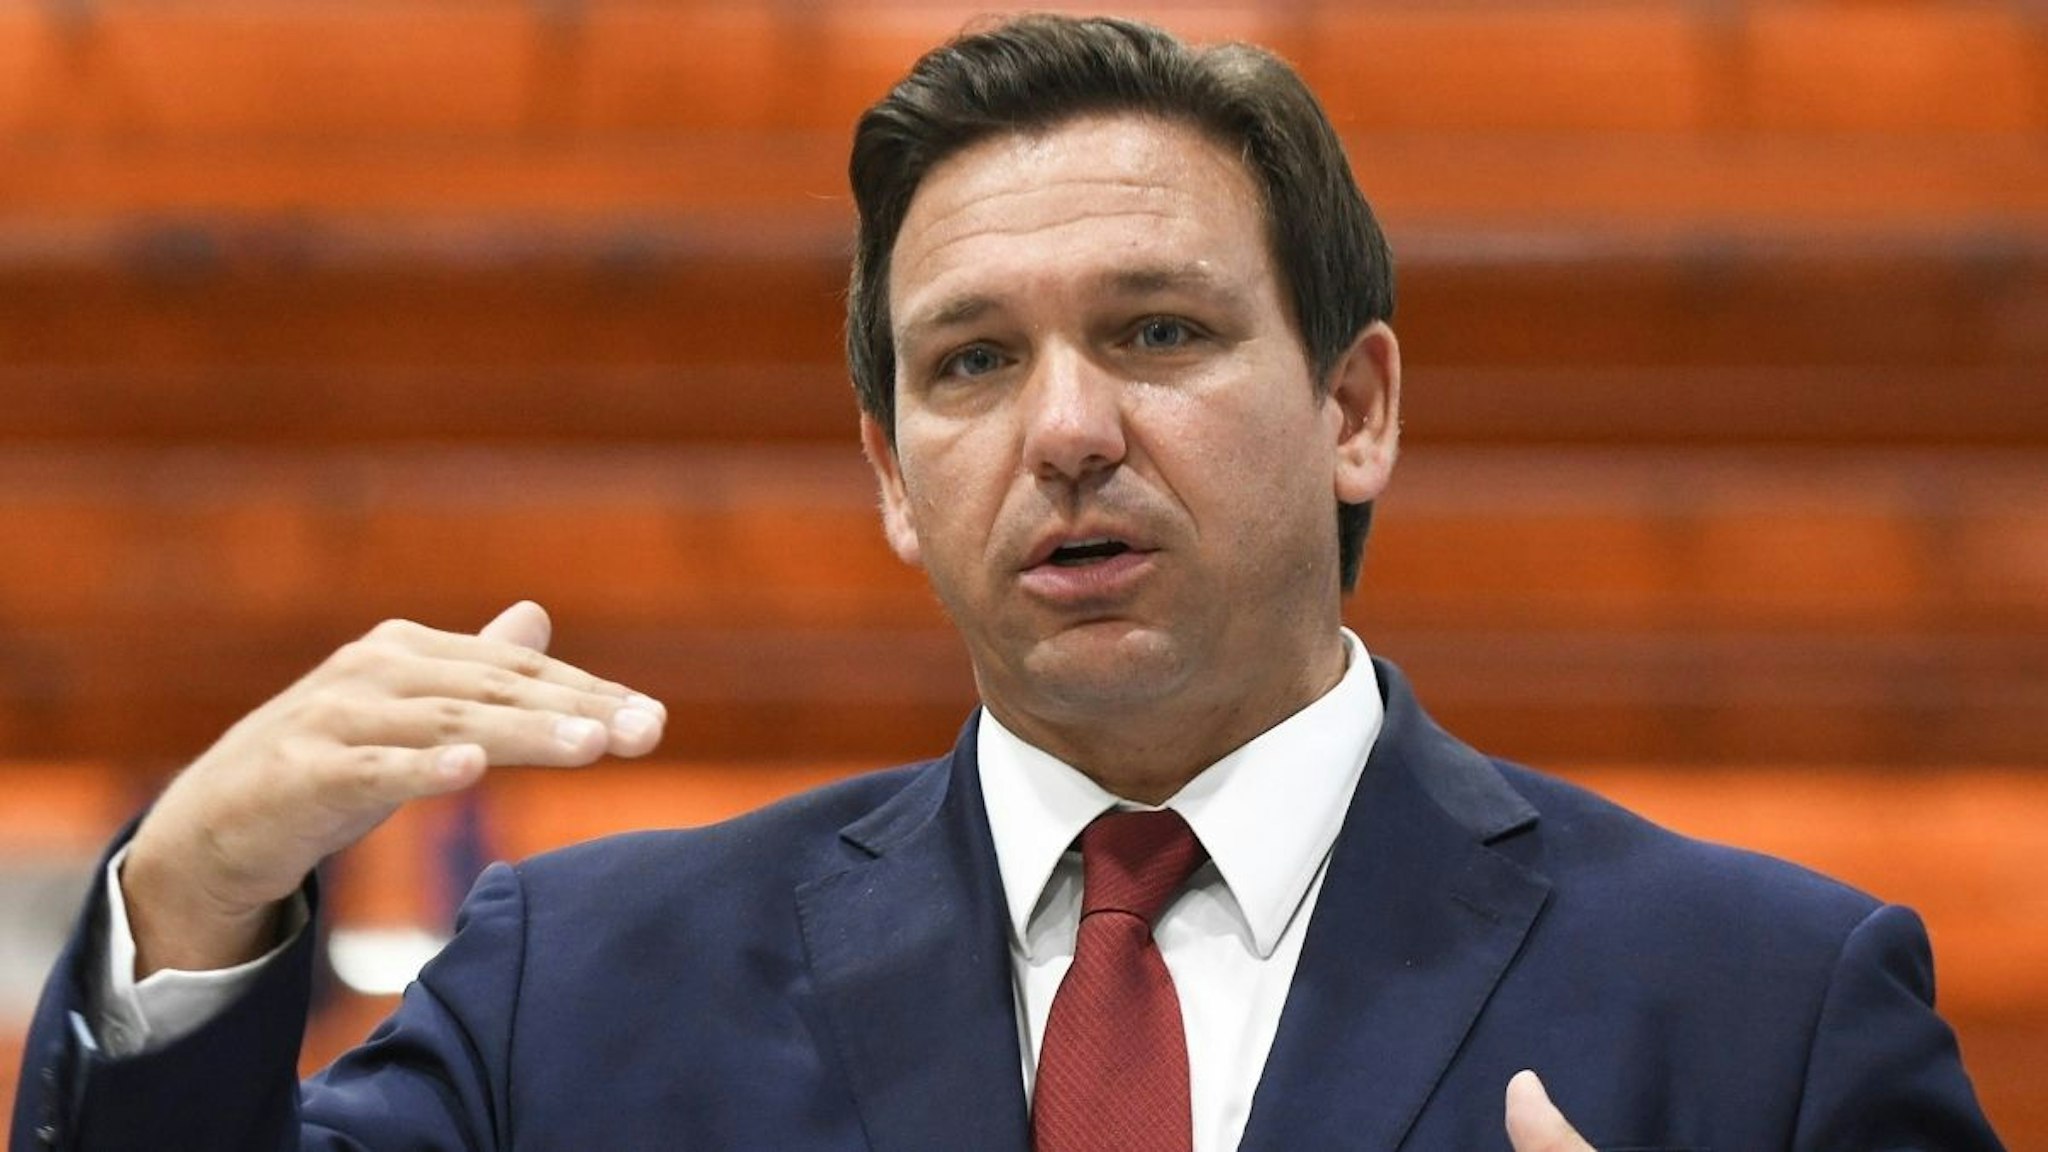 Florida Gov. Ron DeSantis speaks at a press conference at LifeScience Logistics to urge the Biden administration to approve Florida's plan to import prescription drugs from Canada, thereby saving Floridians an estimated $100 million annually on drug costs.